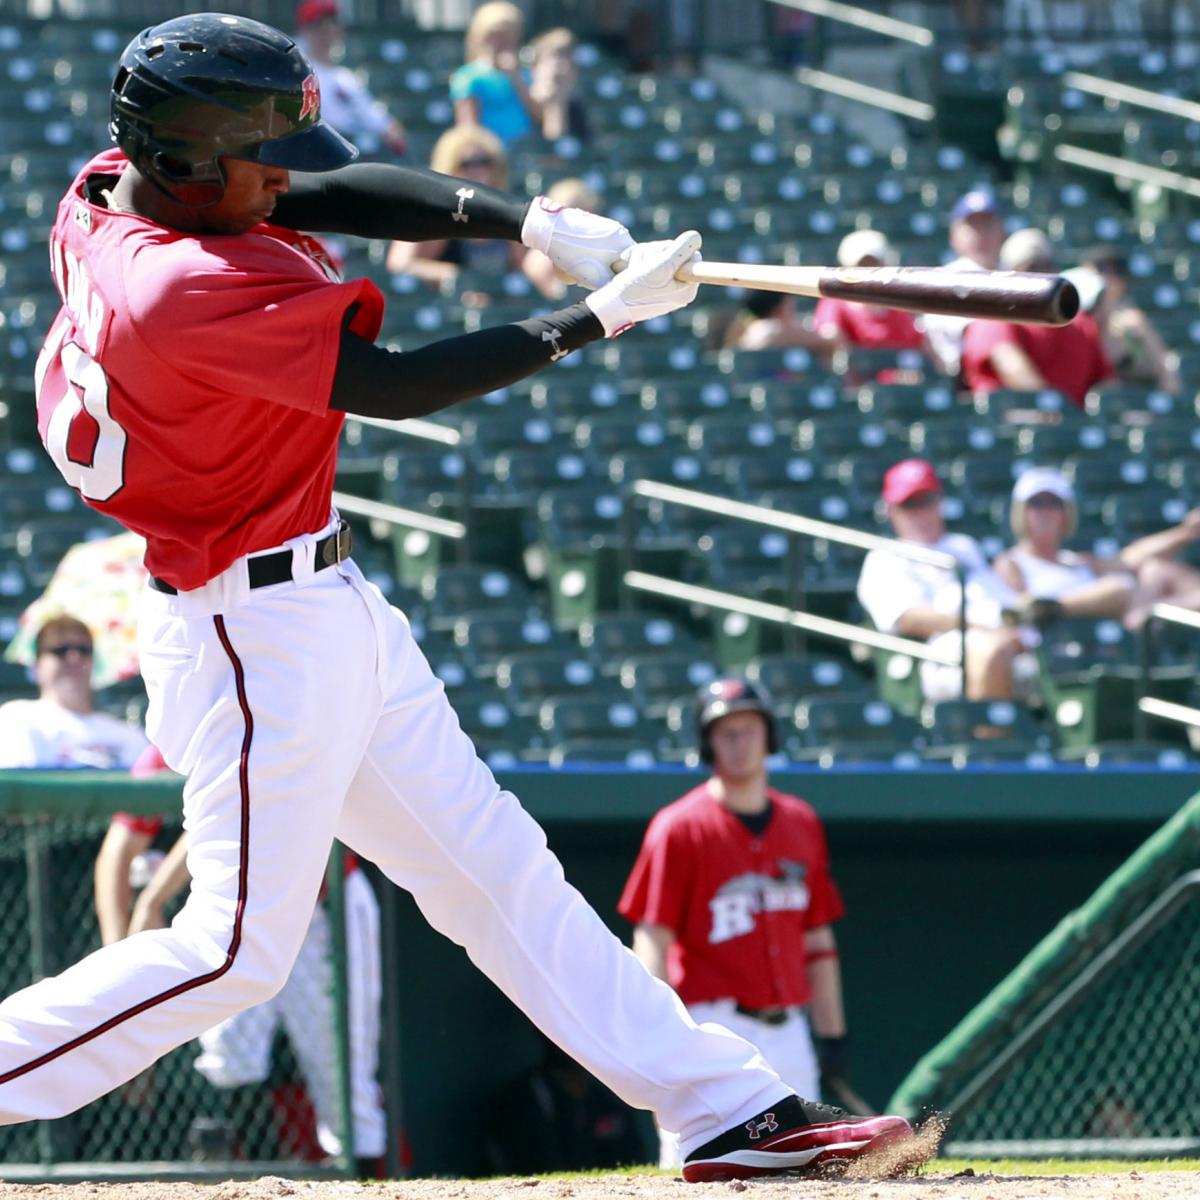 MLB Prospects Hottest Hitting Prospects at Every Minor League Level